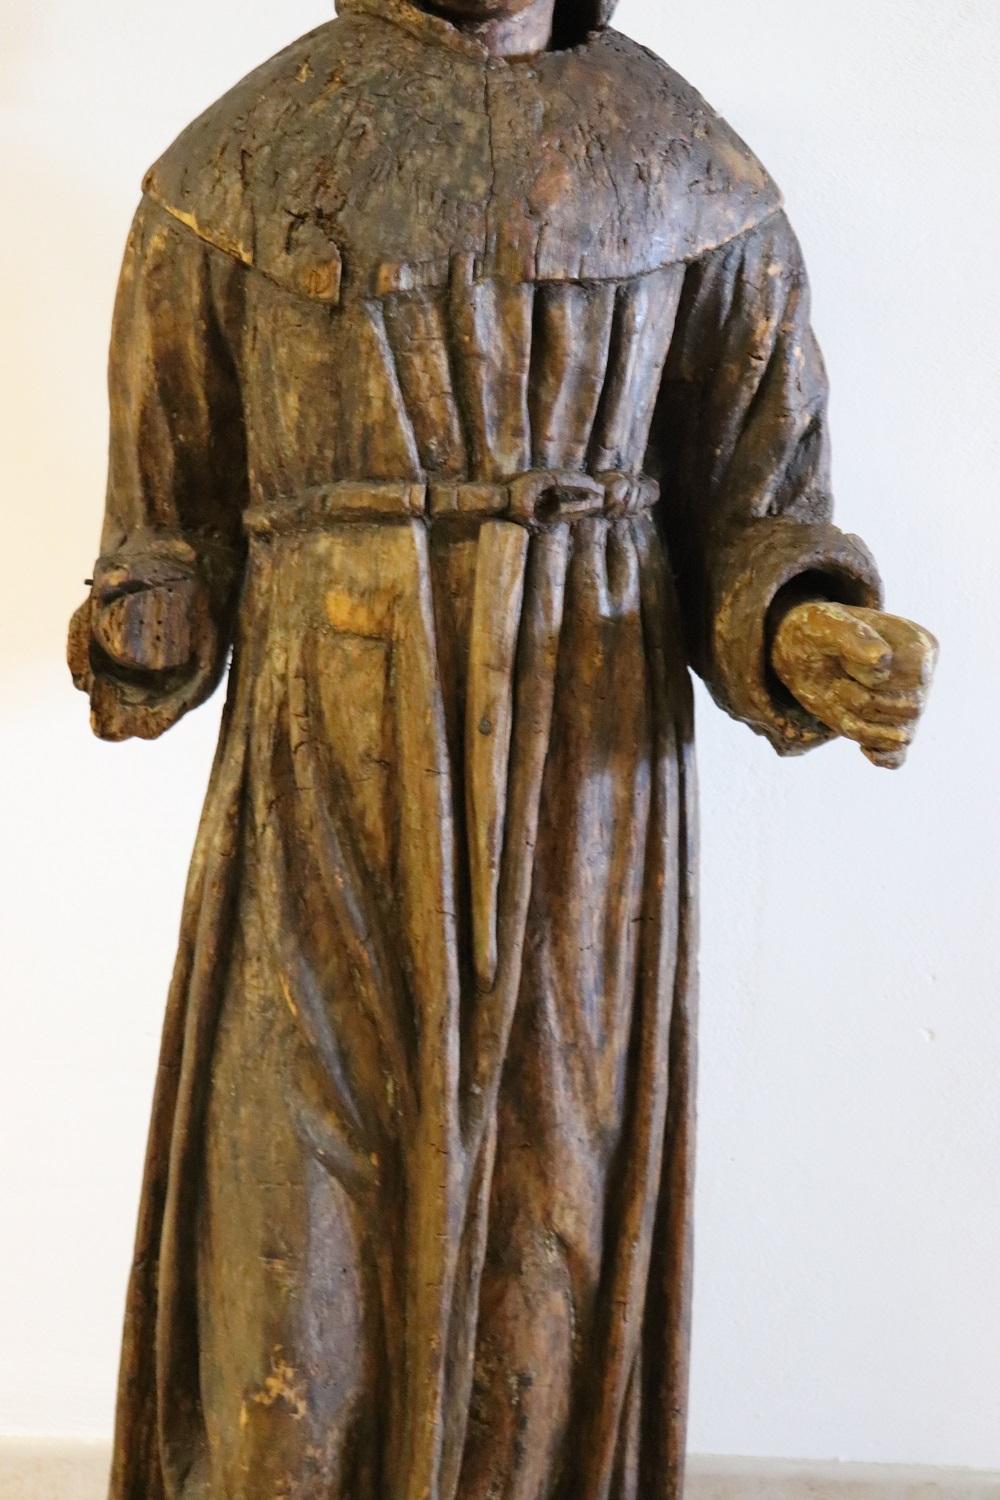 Rare antique italan wood sculpture, 17th century. Finely carved wooden work depicting a religious subject, a saint, identifiable with the figure of Saint Francis, of great size. The sculpture is made on each side to also be displayed in the center